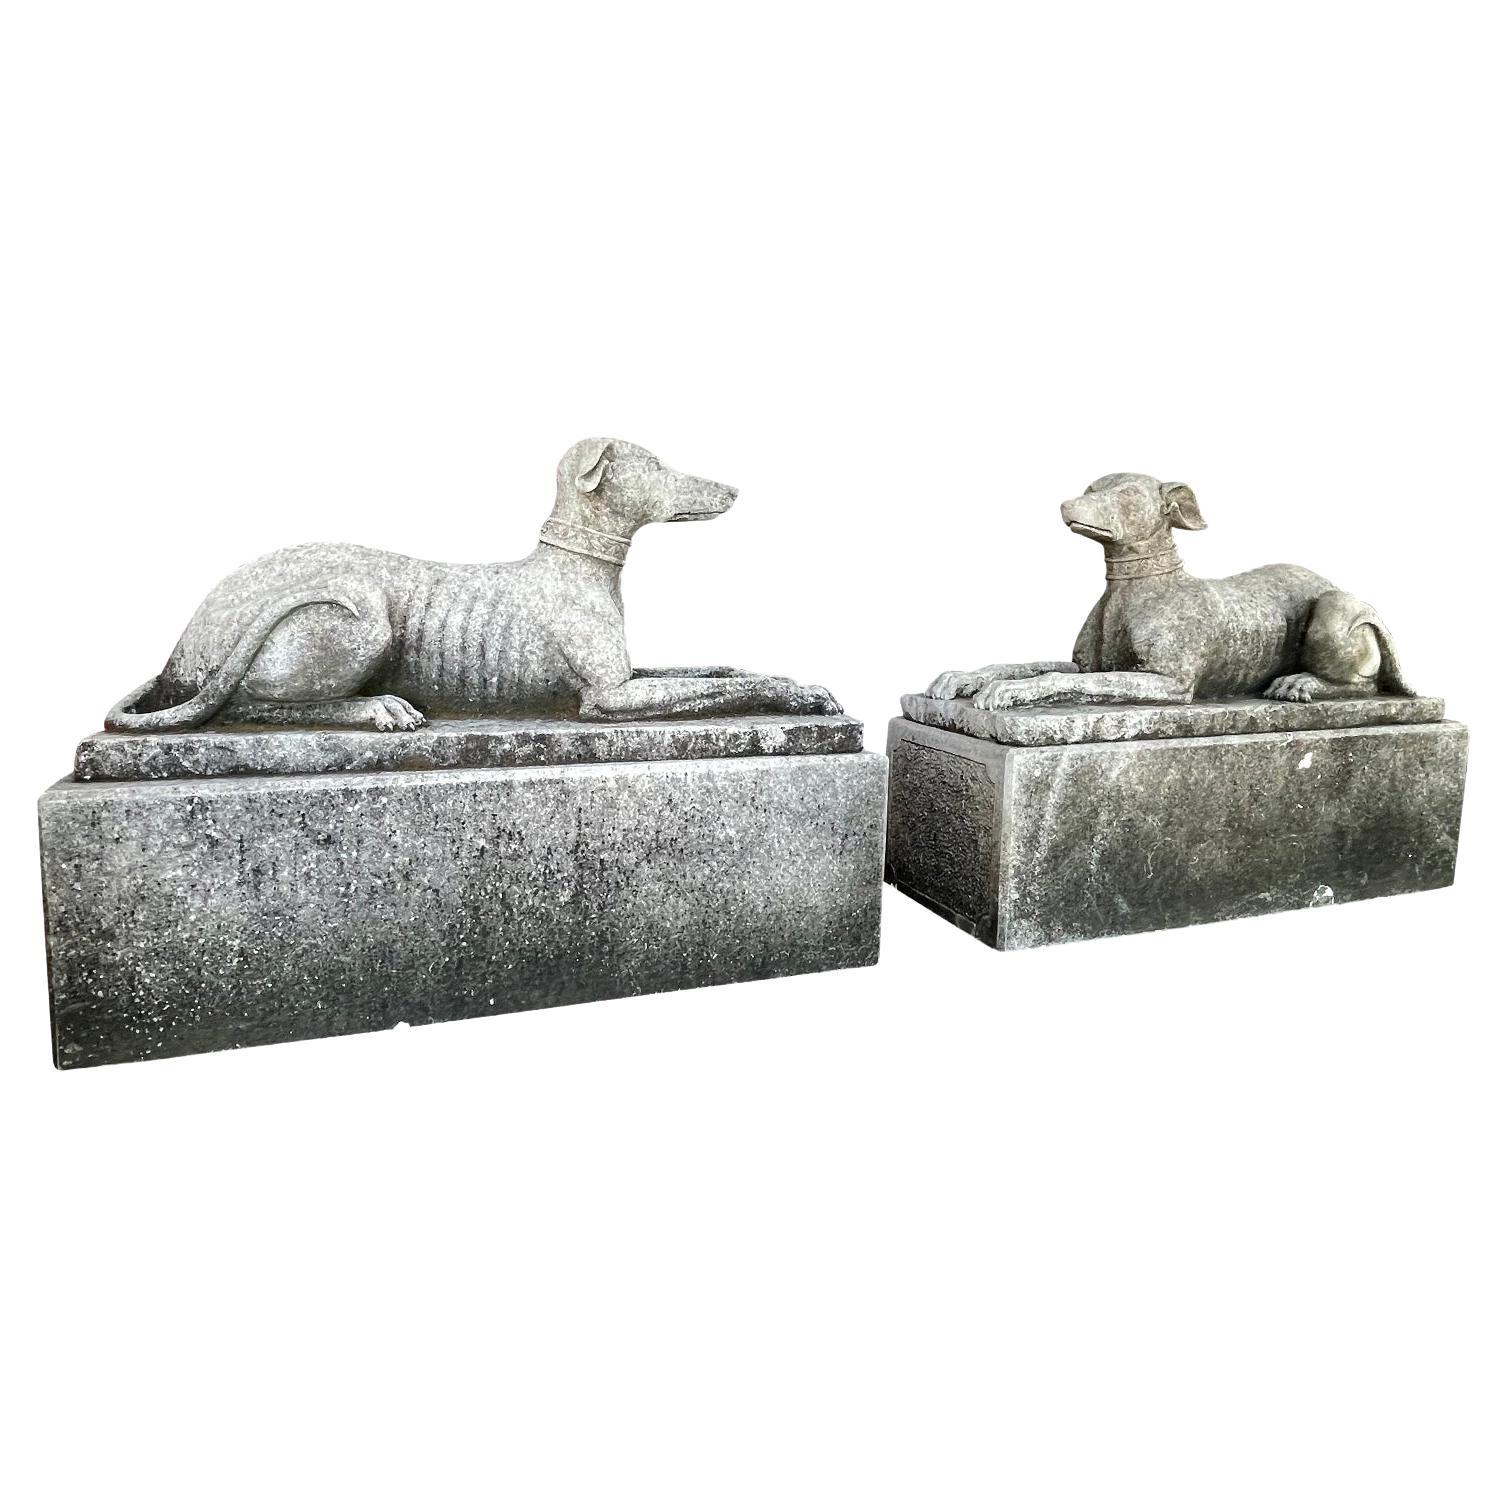 20th Century British Vintage Pair of Whippet Garden Limestone Statues For Sale